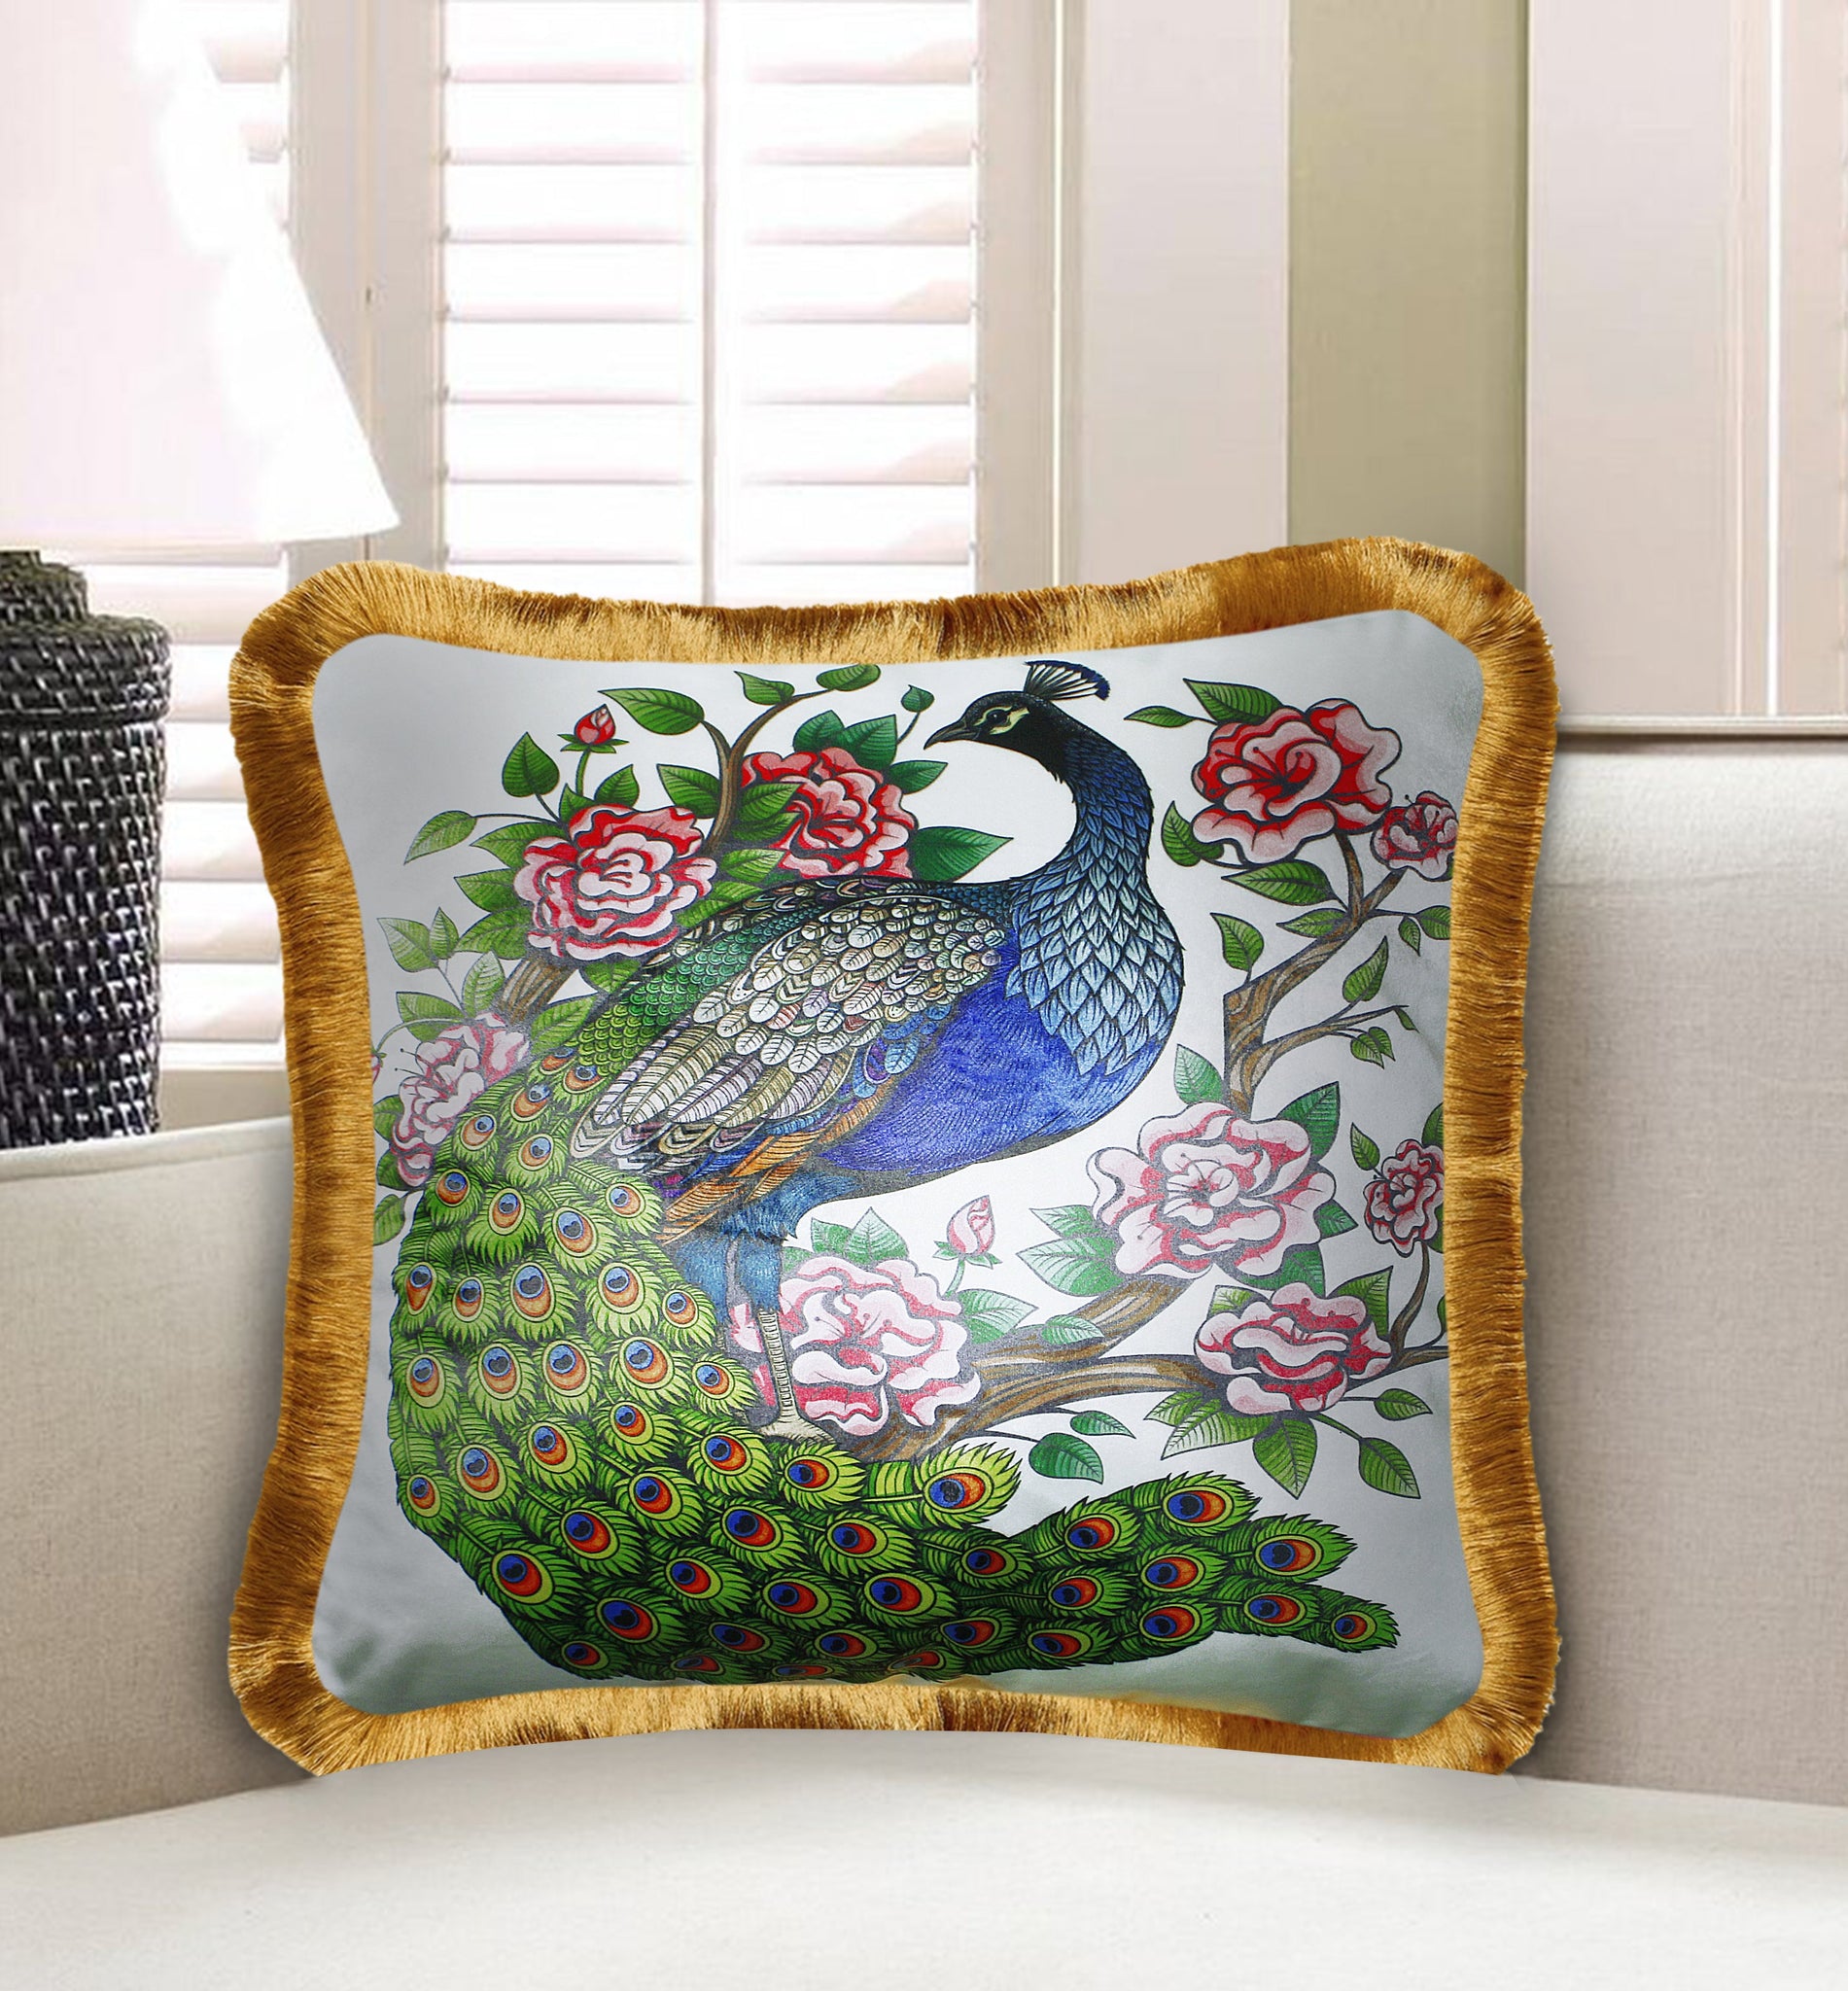 Green Velvet Cushion Cover Peacock and Floral Decorative Pillow Cover Home Decor Throw Pillow for Sofa Chair Couch Bedroom 45x45 cm 18x18 In